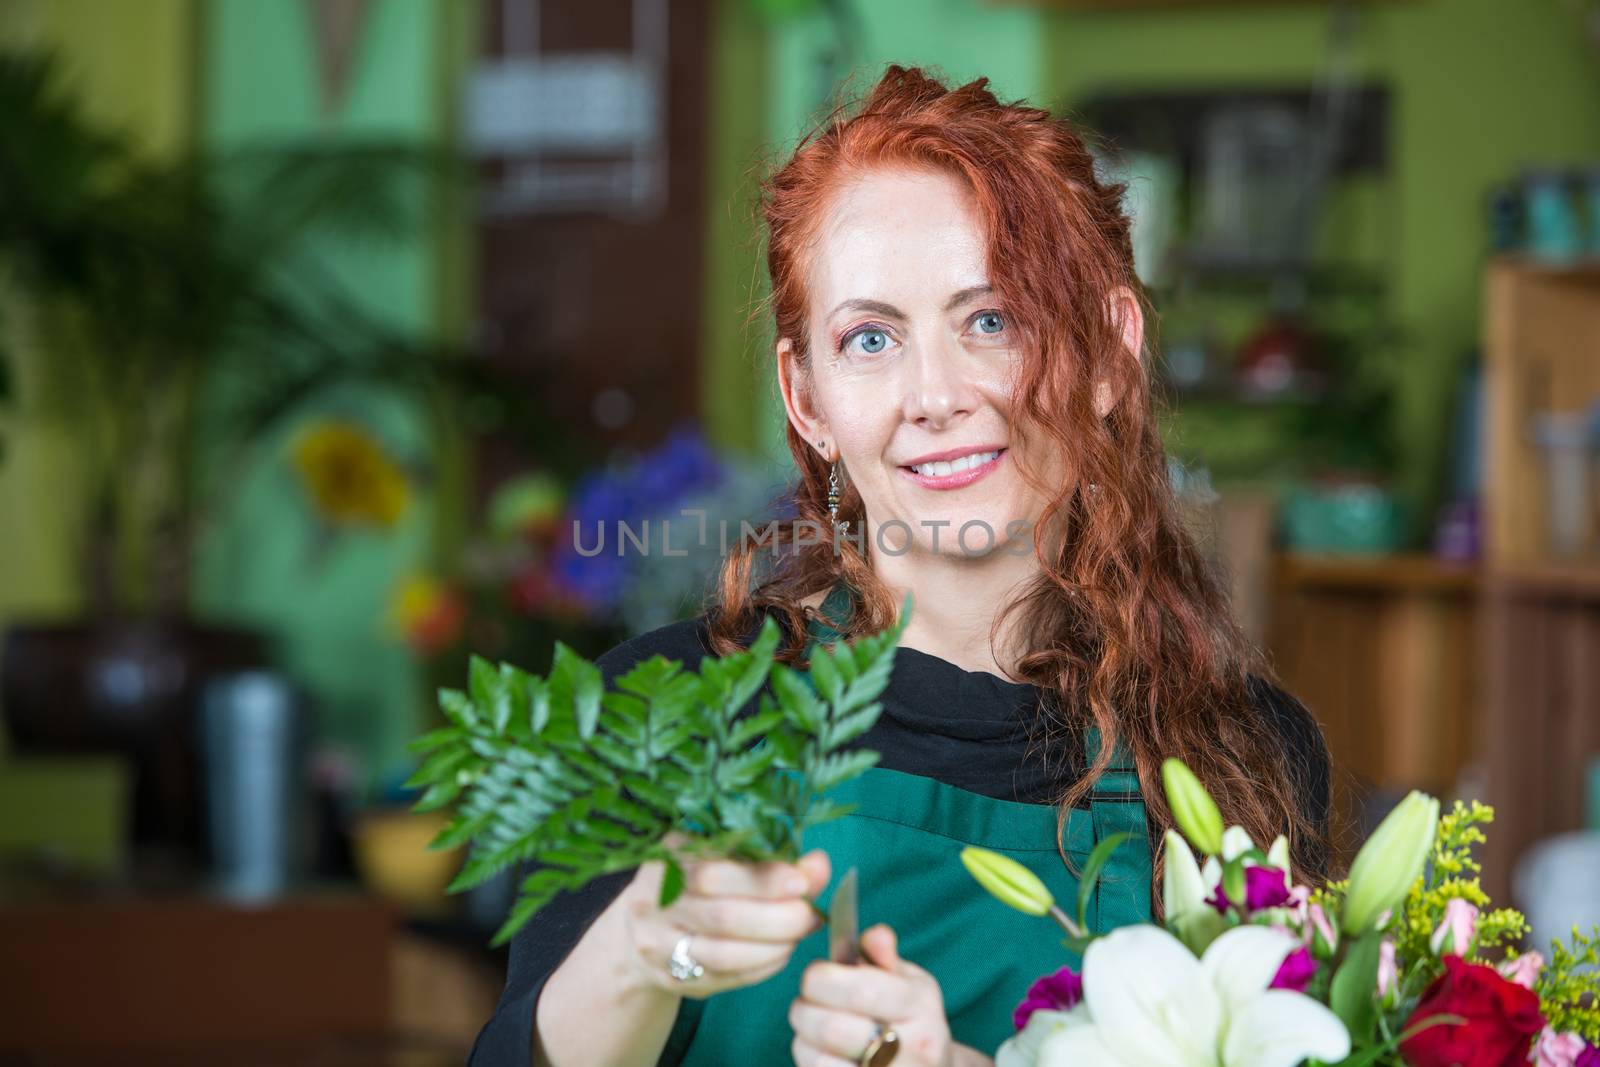 Teen Girl in Flower Shop Purchases Sunflowers by Creatista